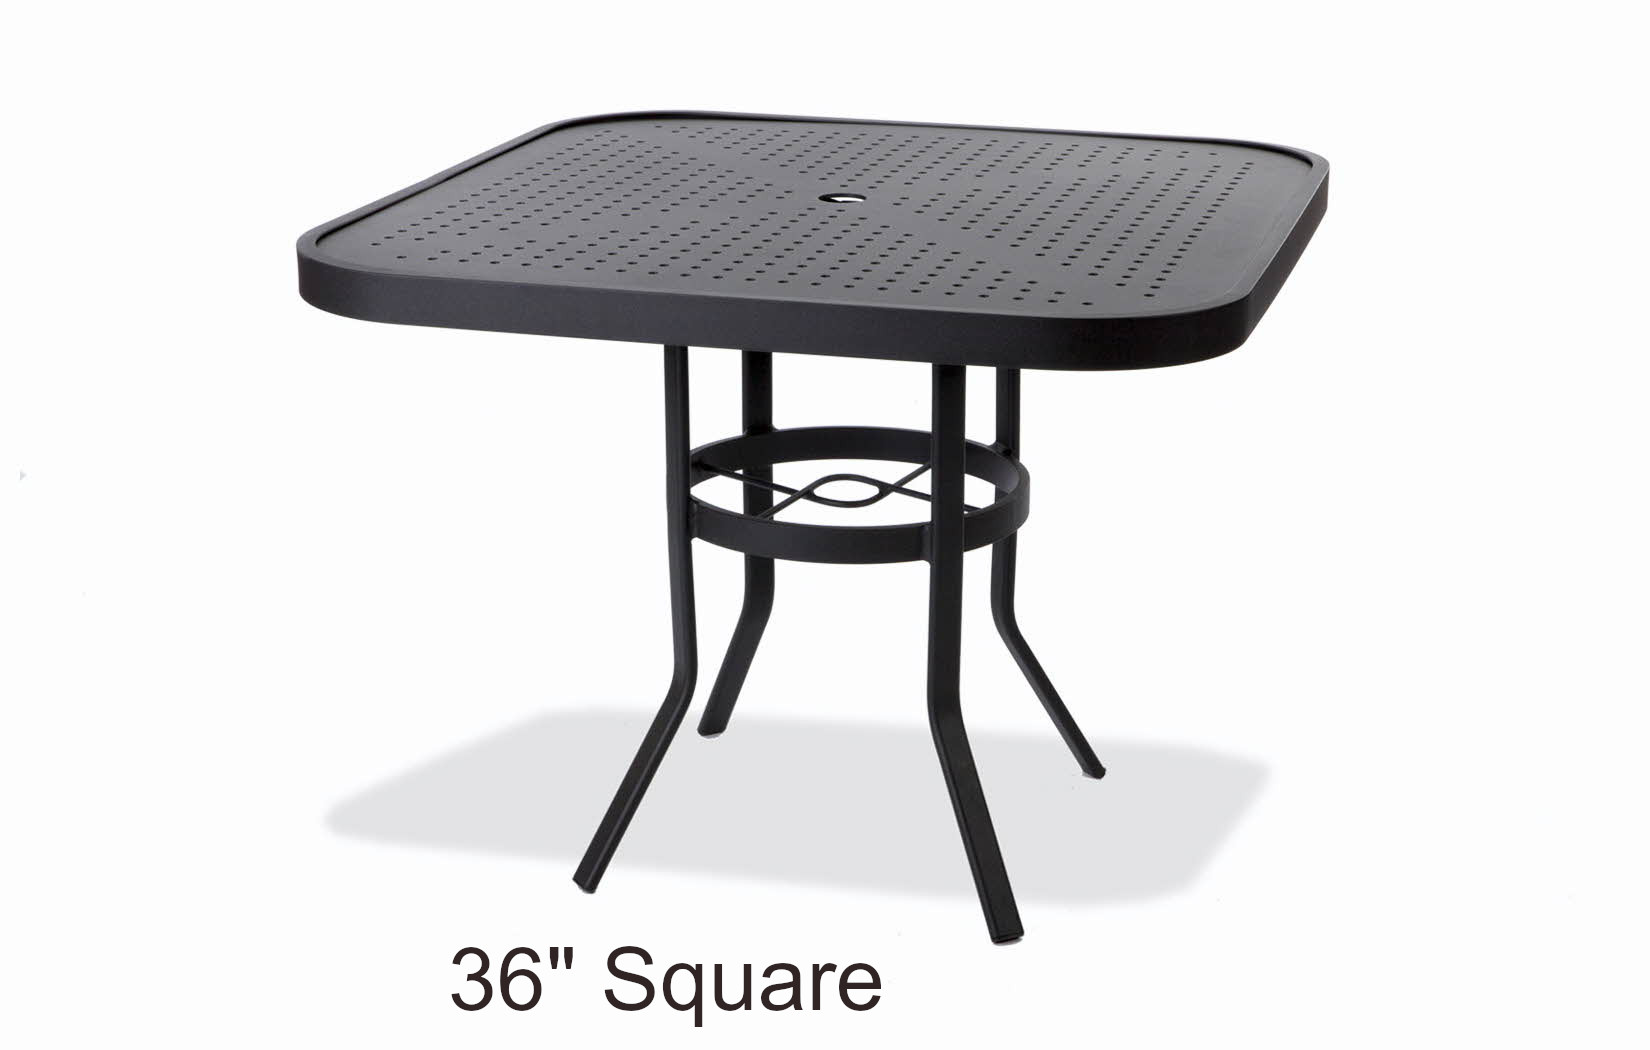 Matrix 36 Inch Square Stamped Aluminum Top Dining Table